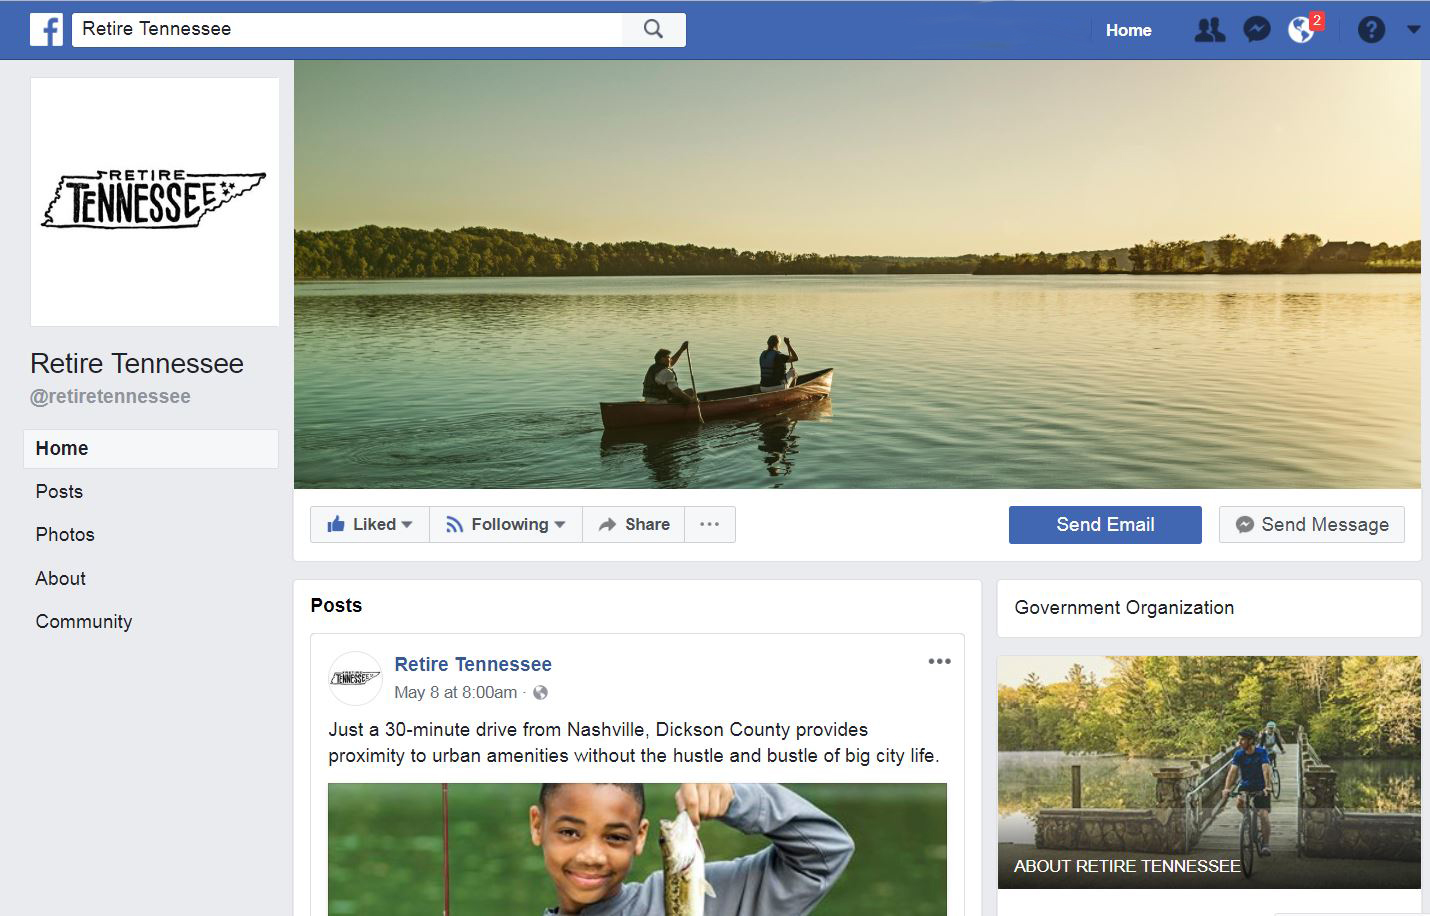 Retire Tennessee reaches broad retiree audience thanks to new Facebook page.